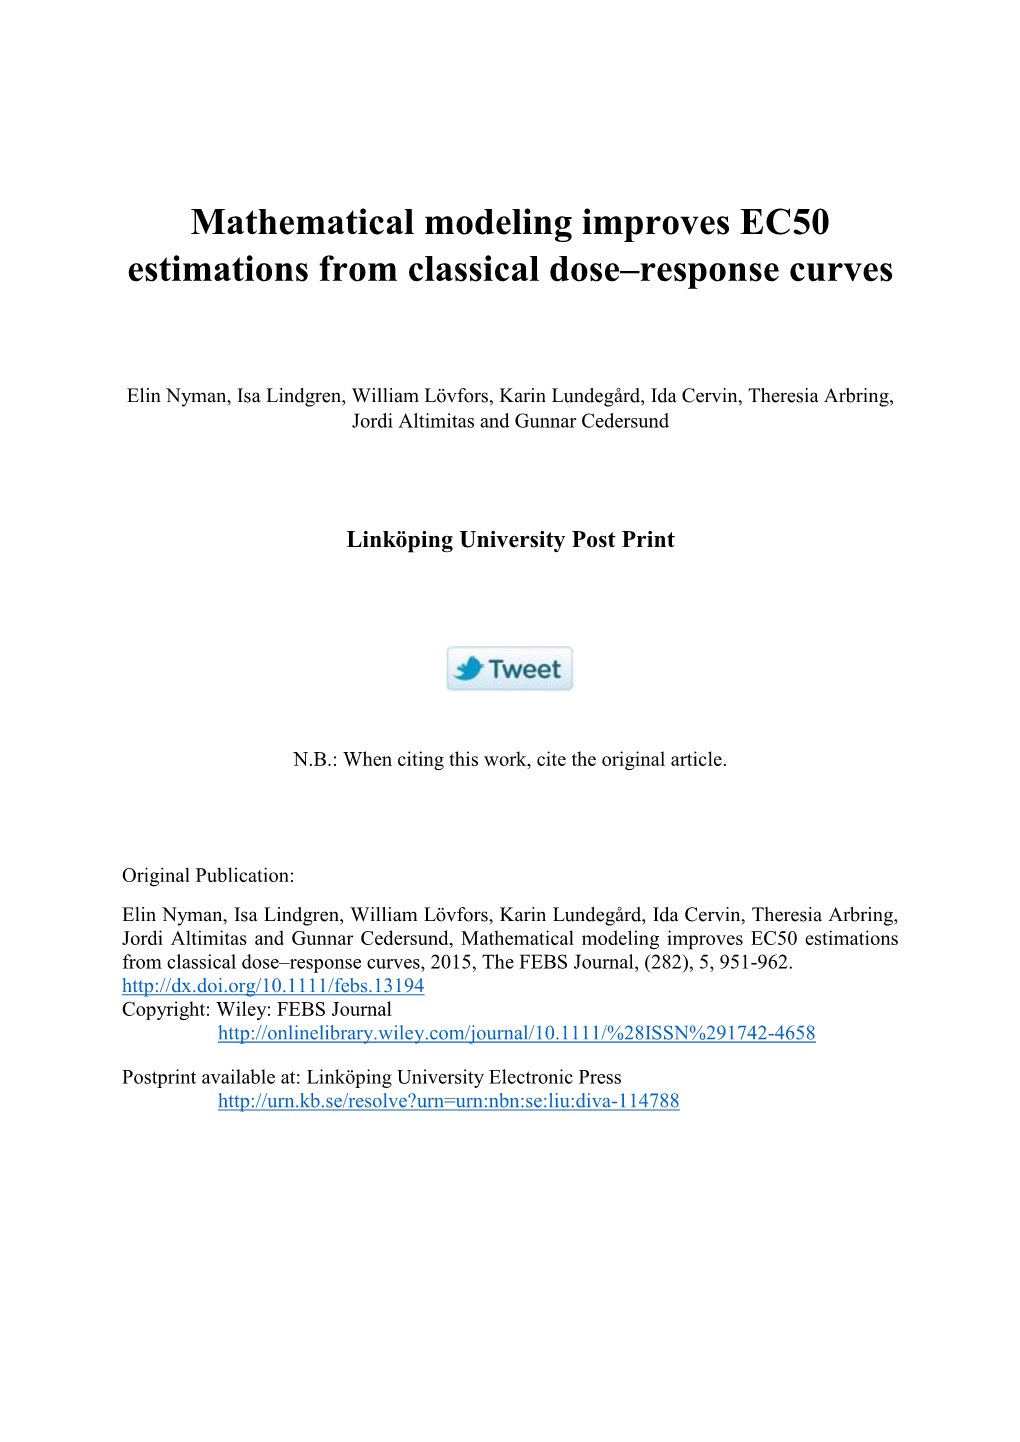 Mathematical Modeling Improves EC50 Estimations from Classical Dose–Response Curves